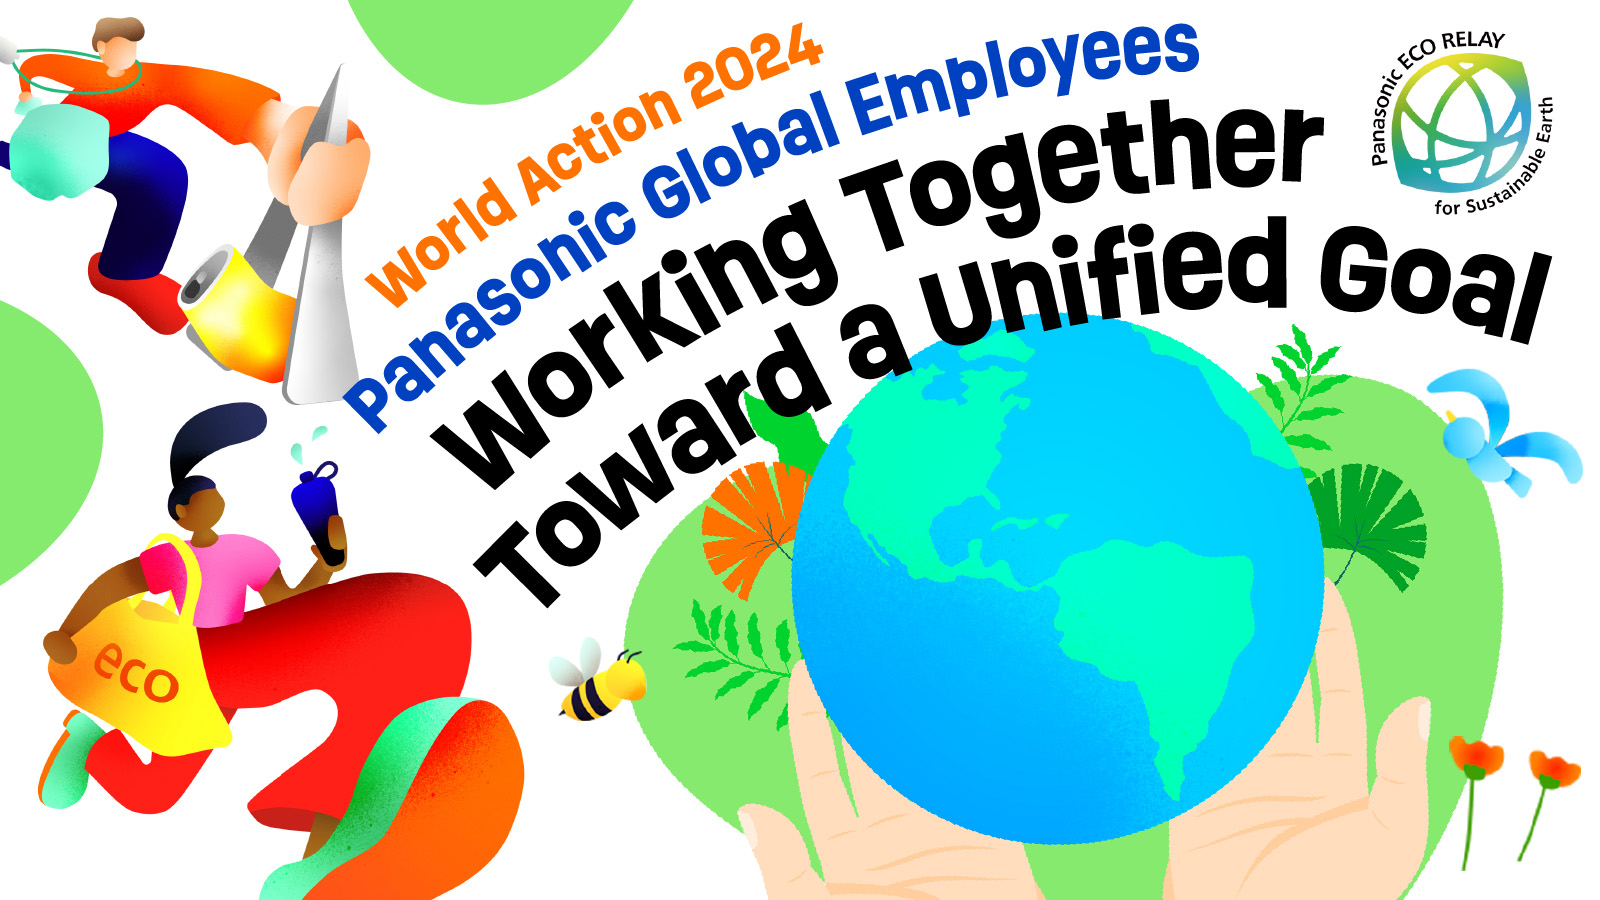 World Action 2024: Panasonic employees worldwide work together towards a common goal | CSR | Sustainability | Feature Story